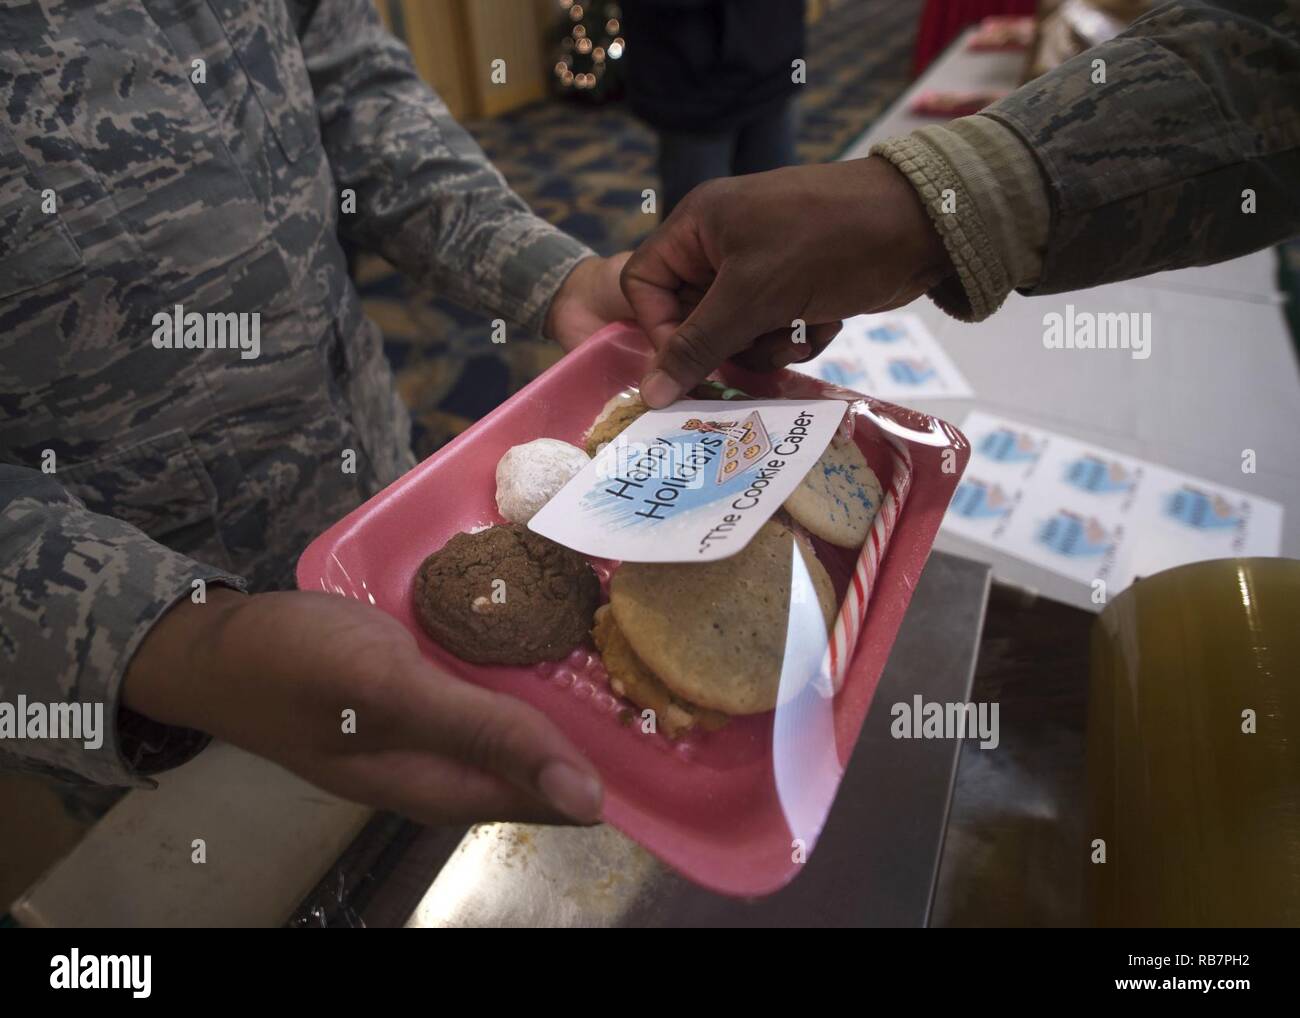 U.S. Air Force Airmen package cookies for delivery during the annual Cookie Caper event at Misawa Air Base, Japan, Dec. 7, 2016. After the cookies are divided and packaged, first sergeants and other leadership across the base hand delivered them to their units. Stock Photo